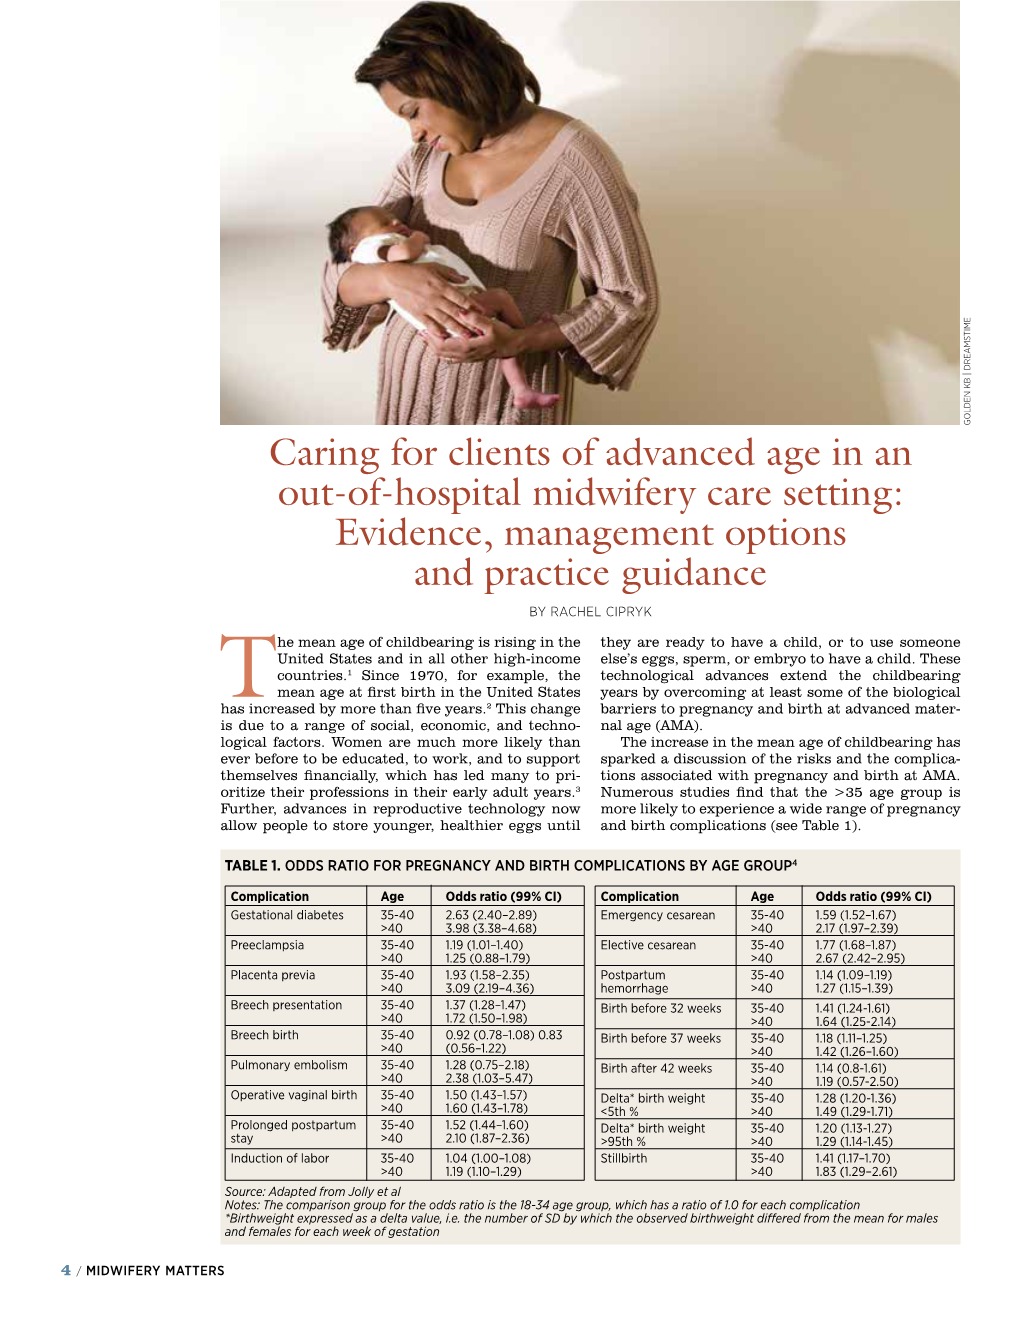 Caring for Clients of Advanced Age in an Out-Of-Hospital Midwifery Care Setting: Evidence, Management Options and Practice Guidance by Rachel Cipryk